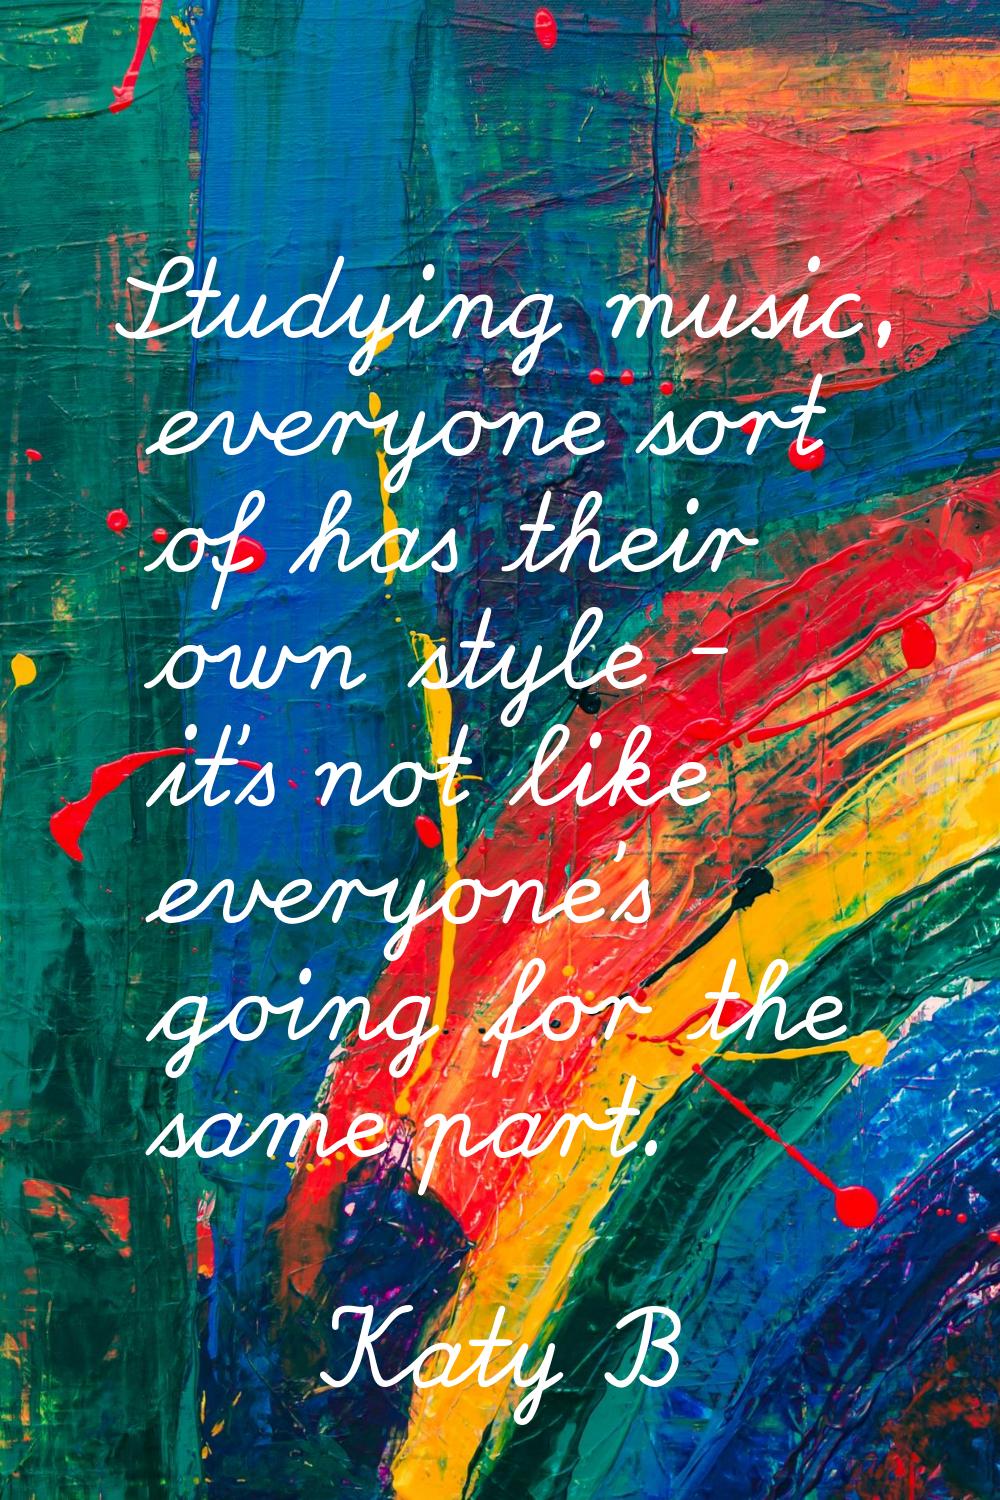 Studying music, everyone sort of has their own style - it's not like everyone's going for the same 